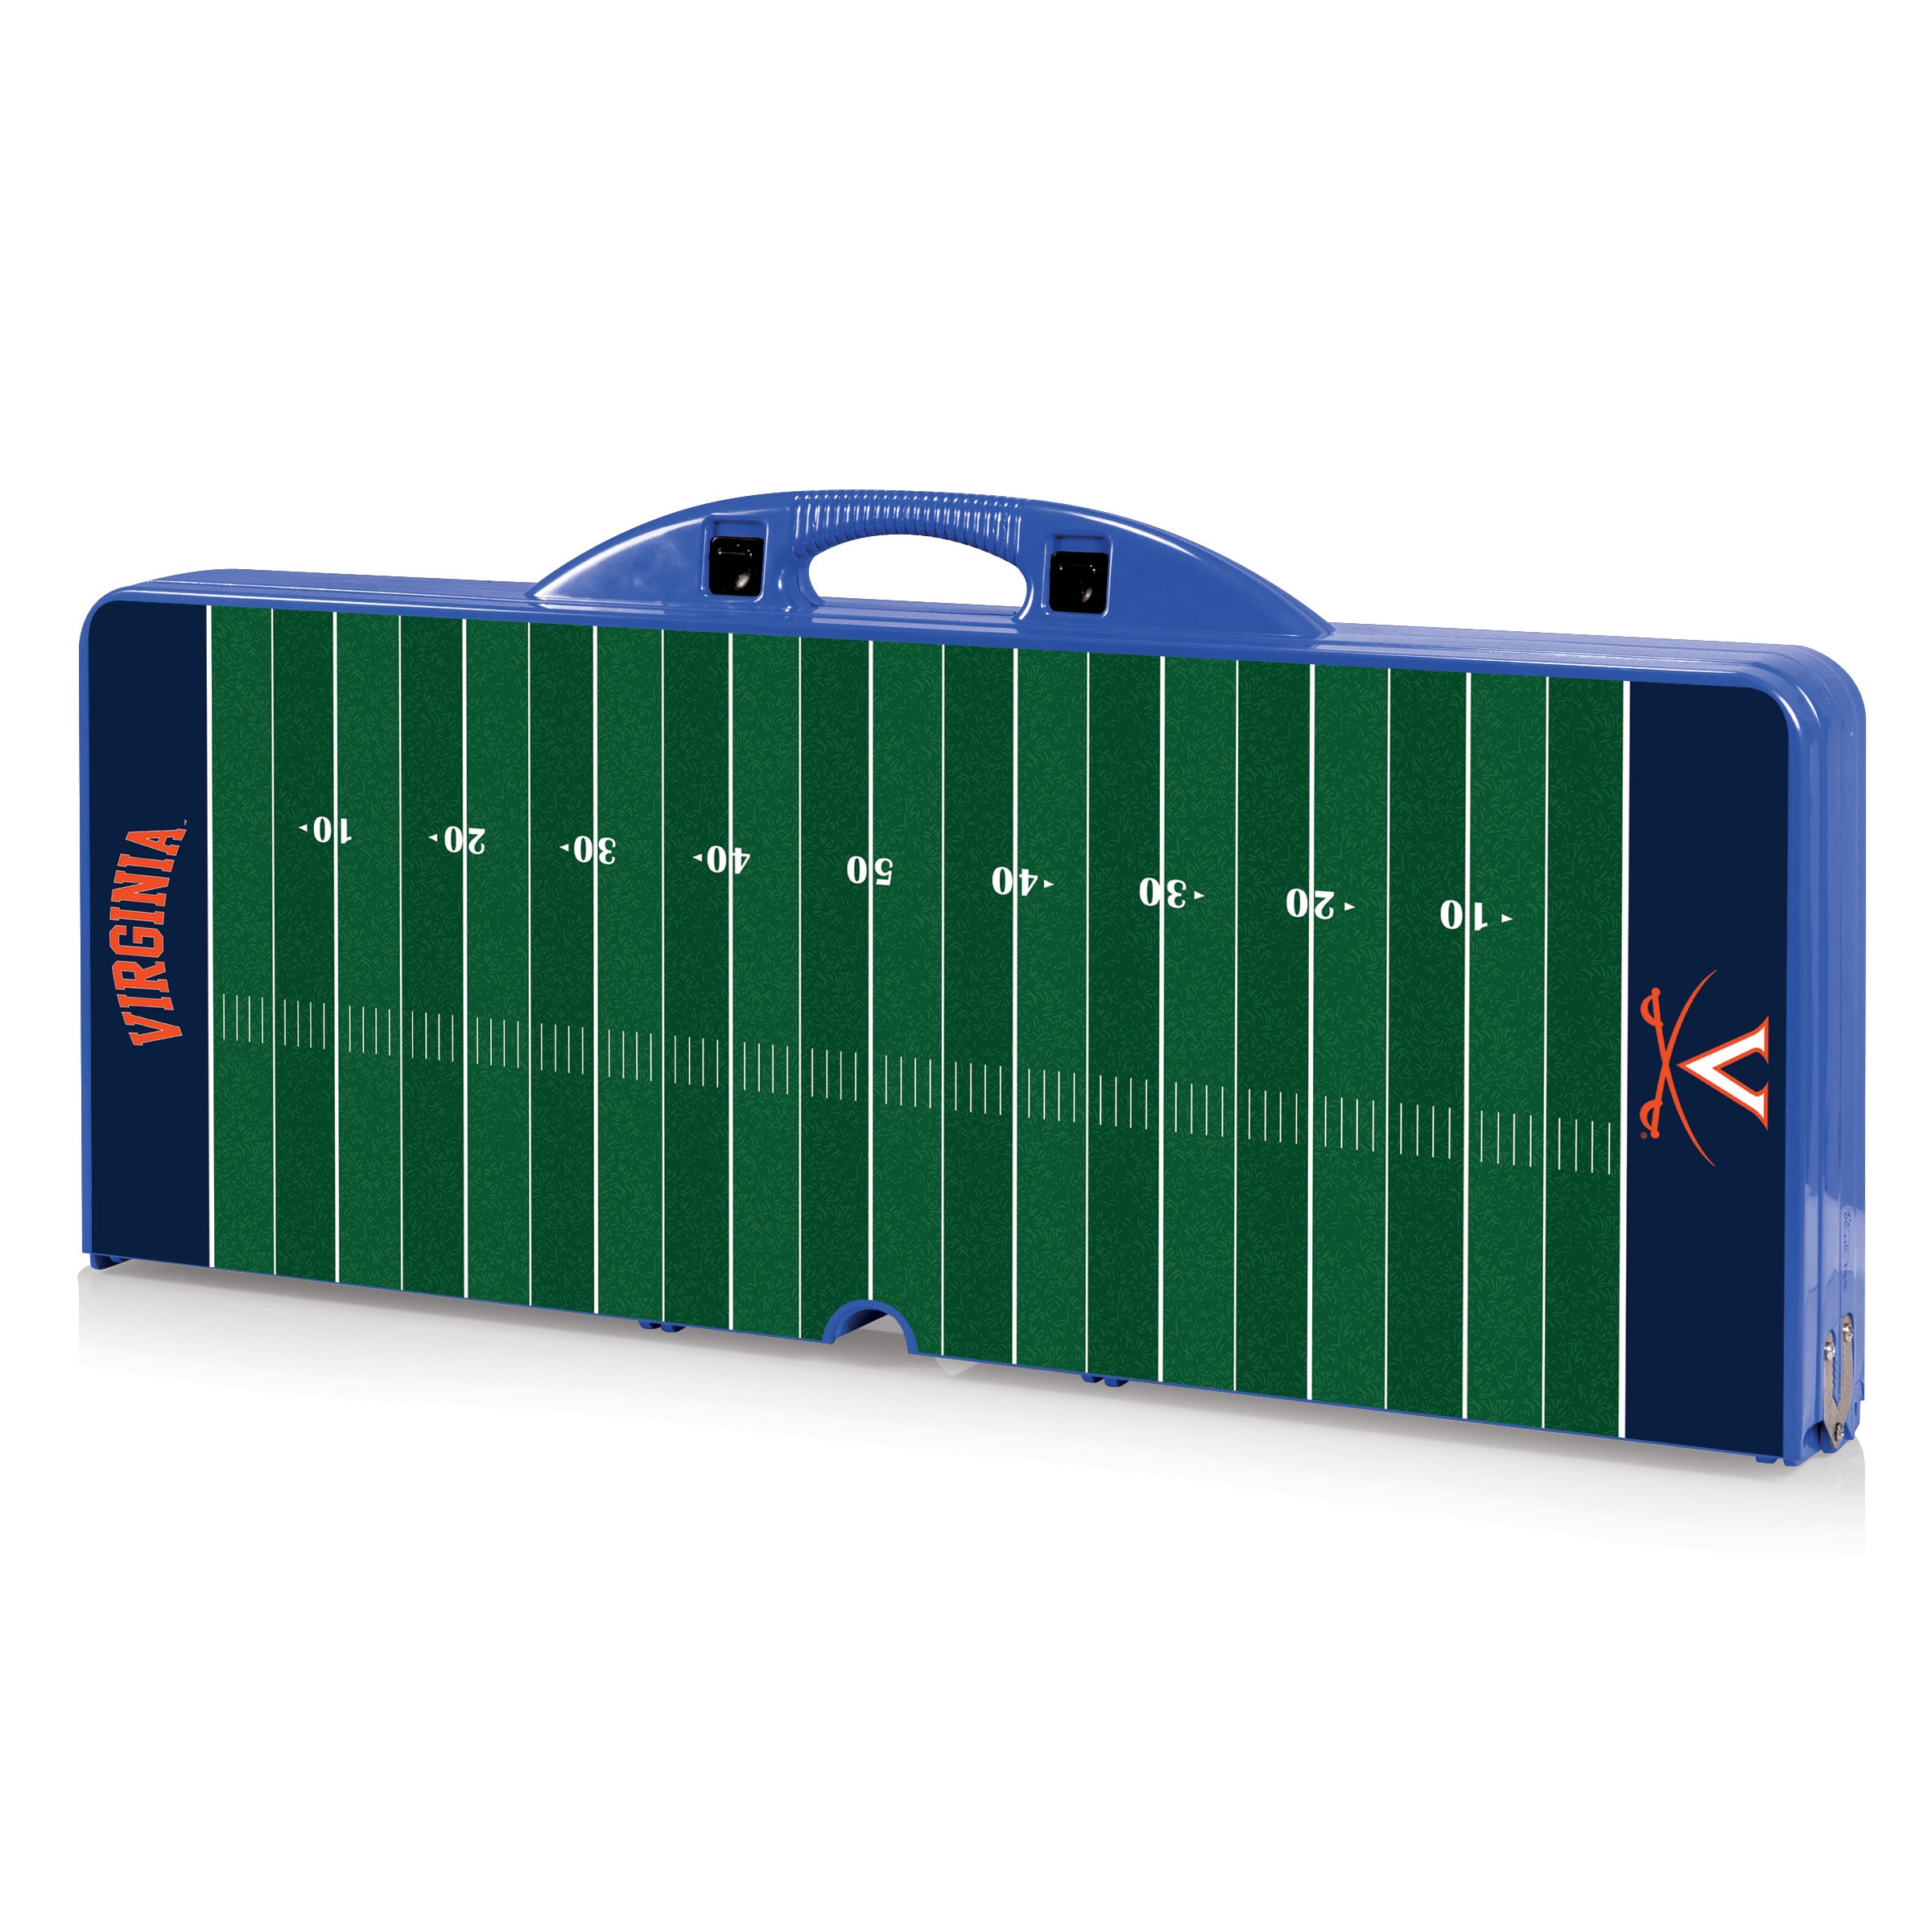 Virginia Cavaliers Football Field - Picnic Table Portable Folding Table with Seats